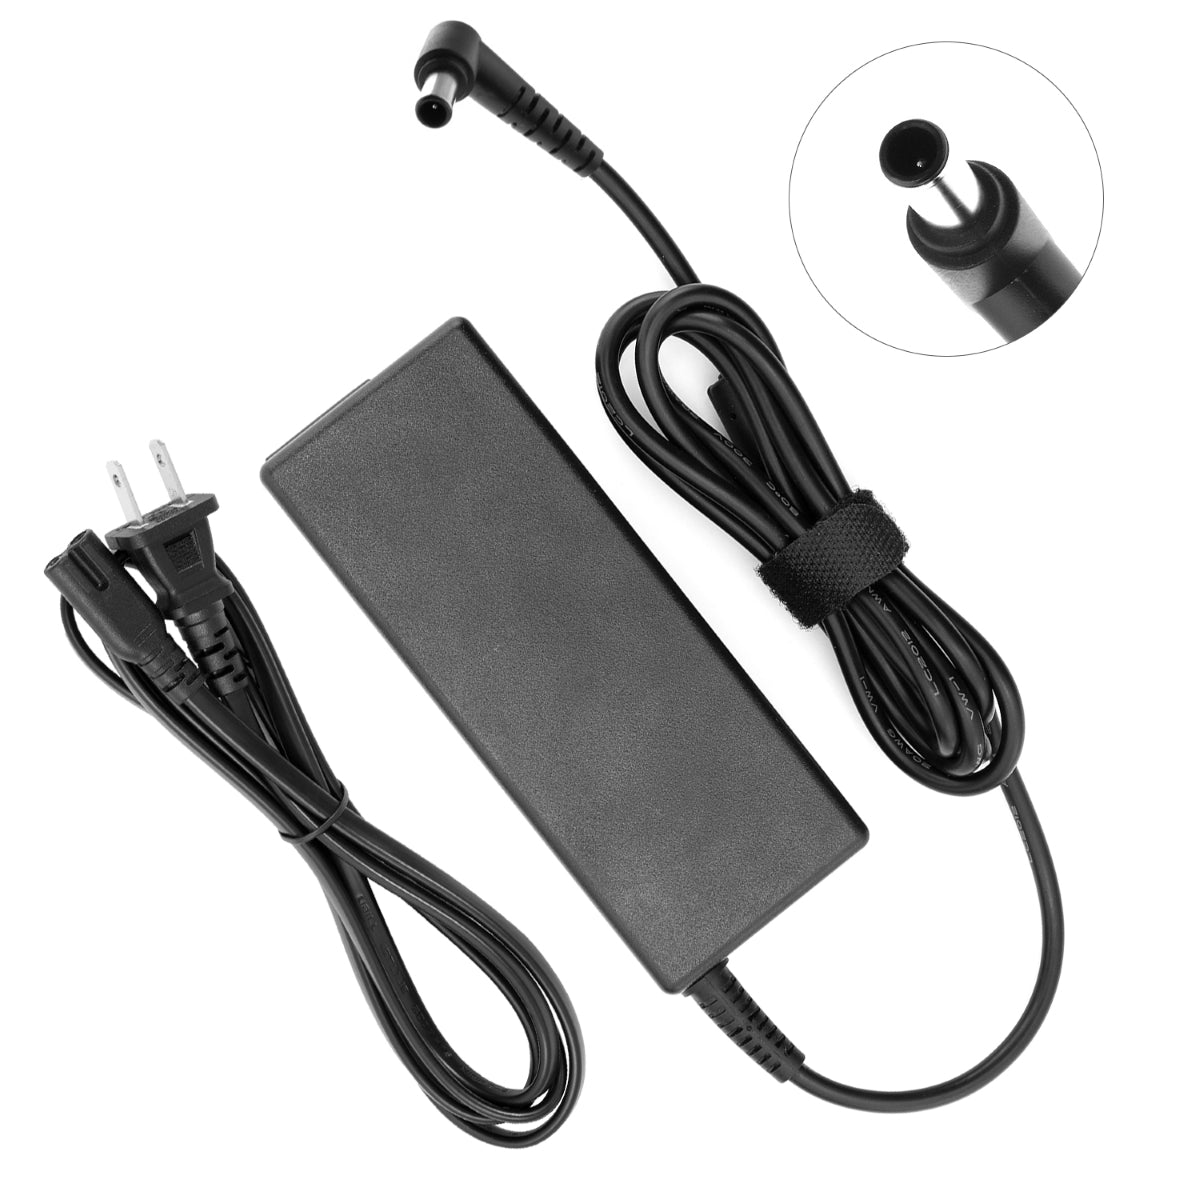 AC Adapter Power Supply for Samsung FX2490HD Monitor